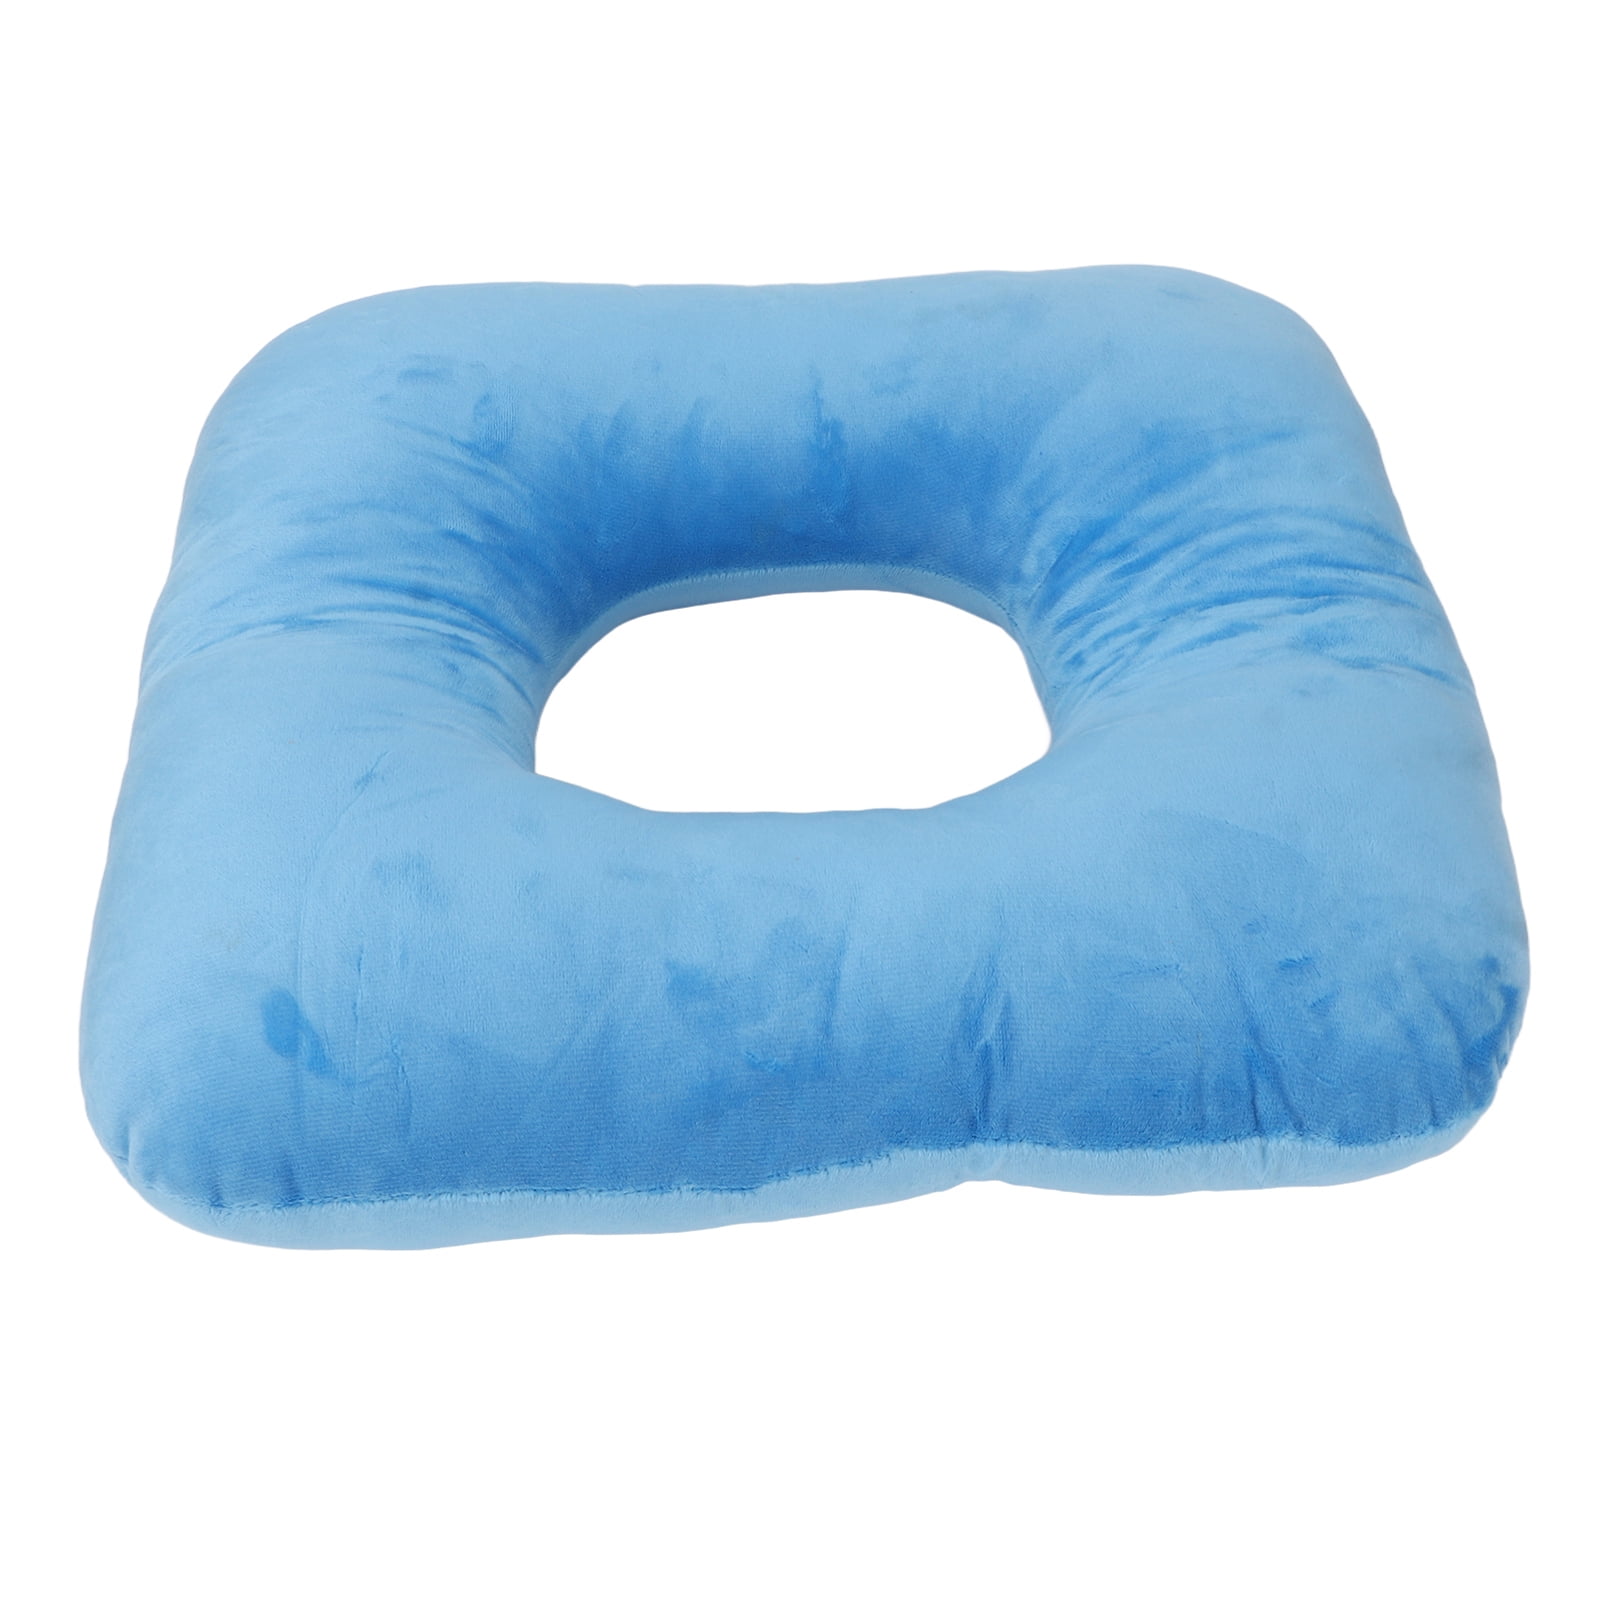 Donut Pillow — Health and Wellness Factory